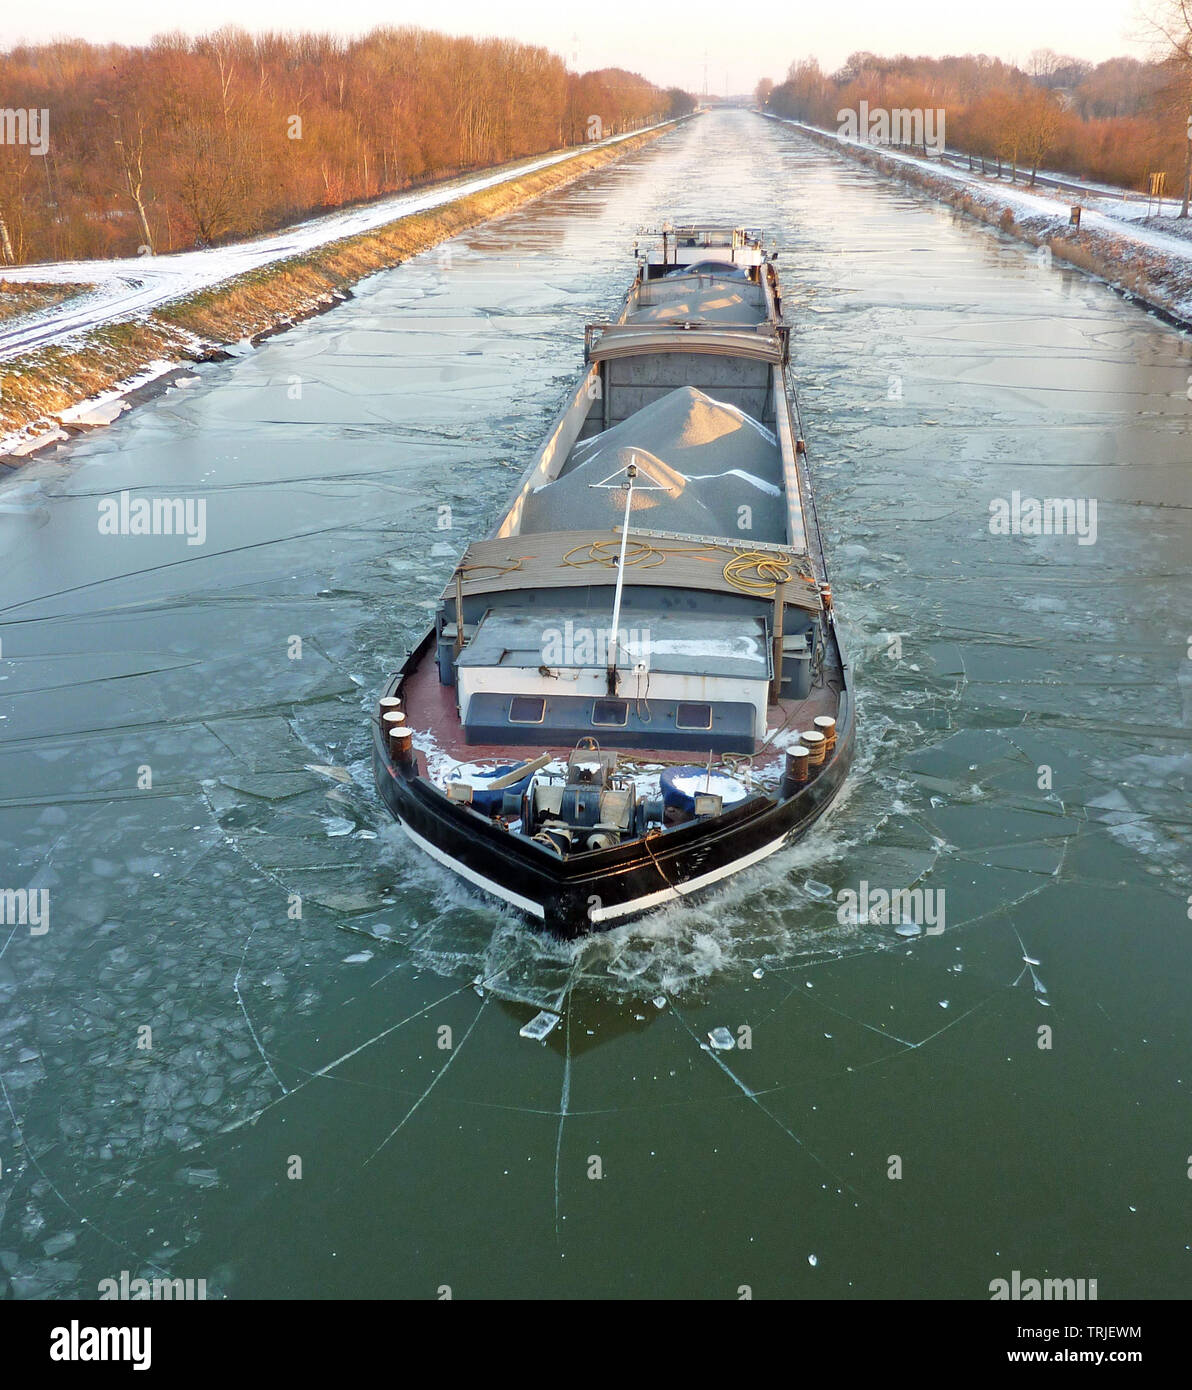 A barge transporting material sailing on a small frozen canal Stock Photo